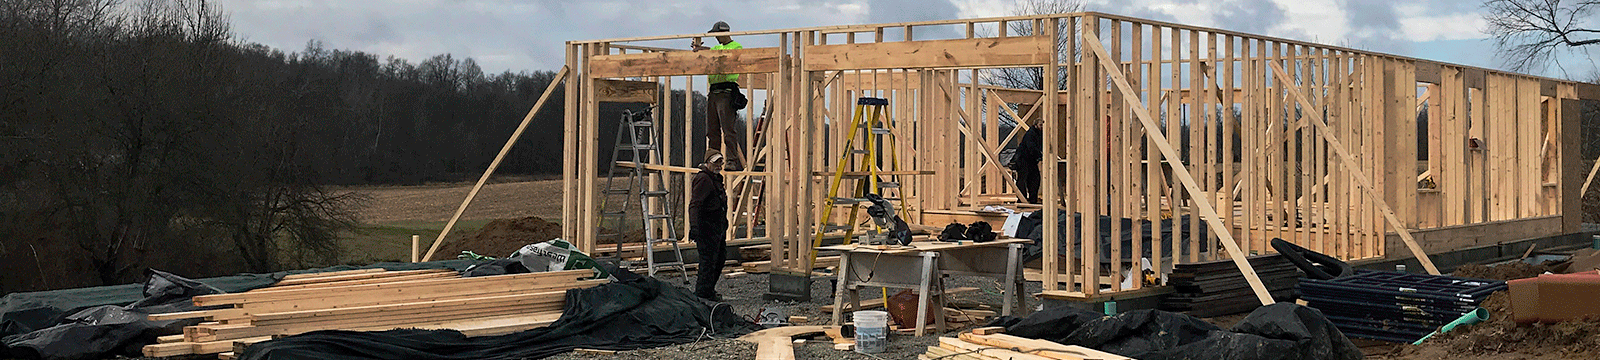 Workers construction the frame of a new home.